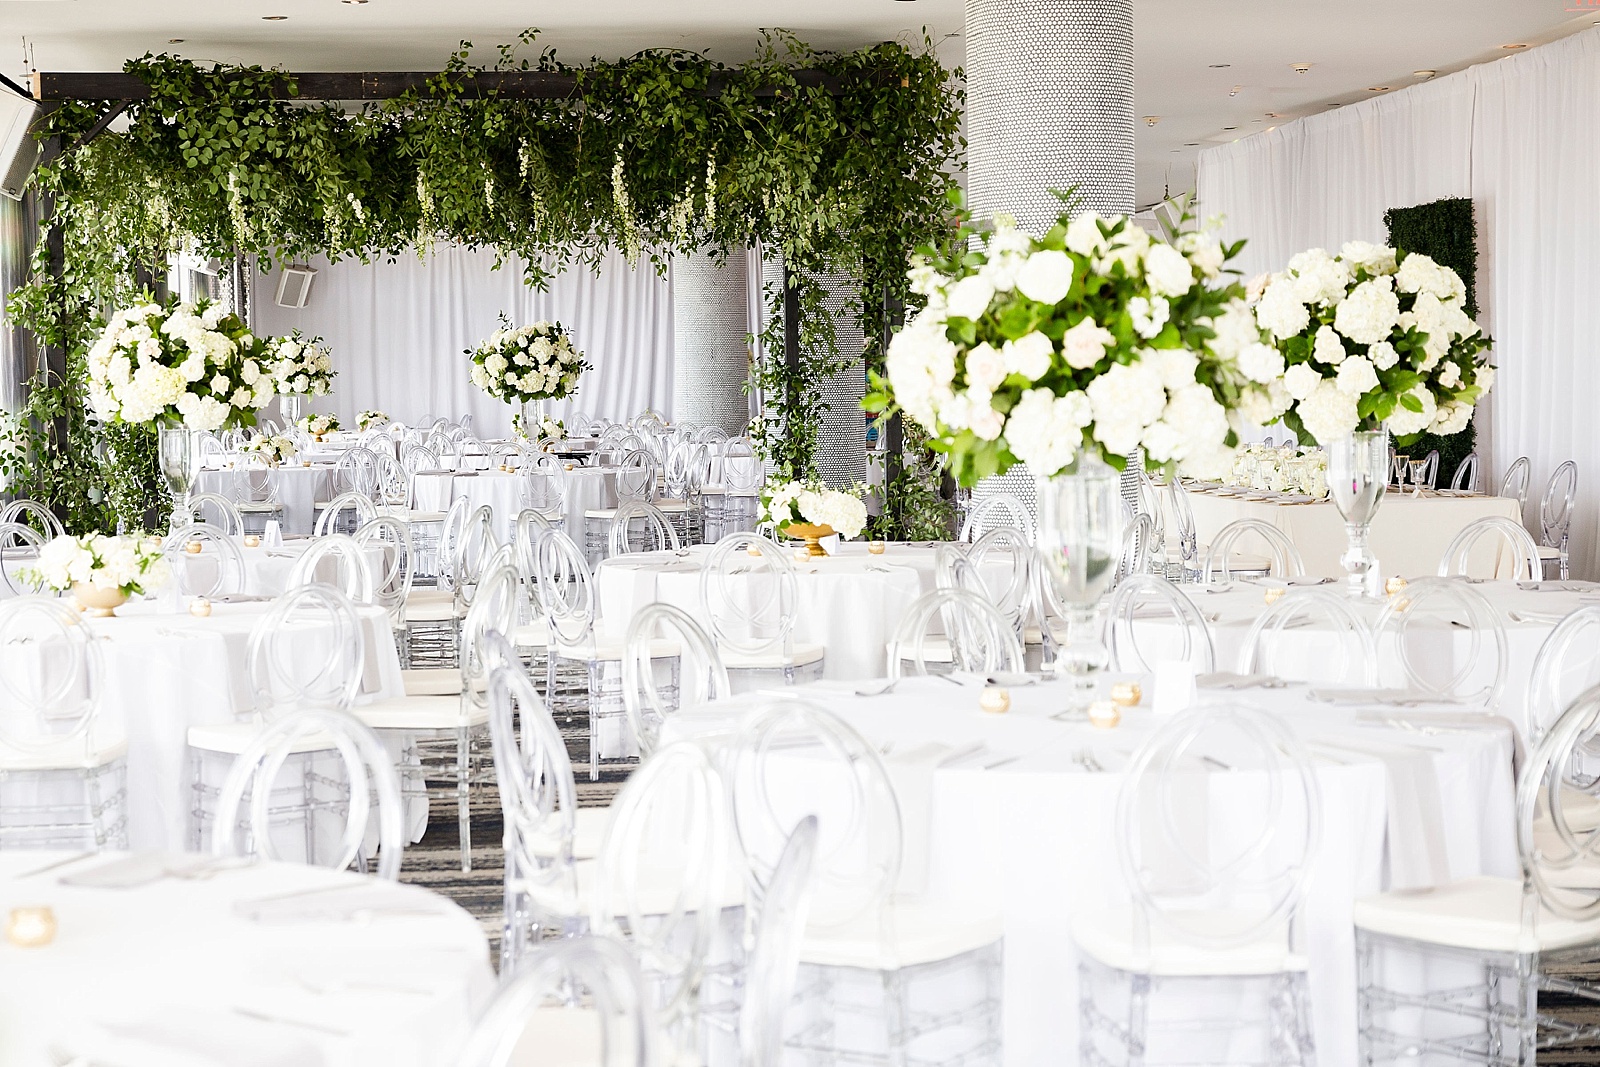 W Hotel Downtown Dallas wedding reception details photographed by Randi Michelle Photography